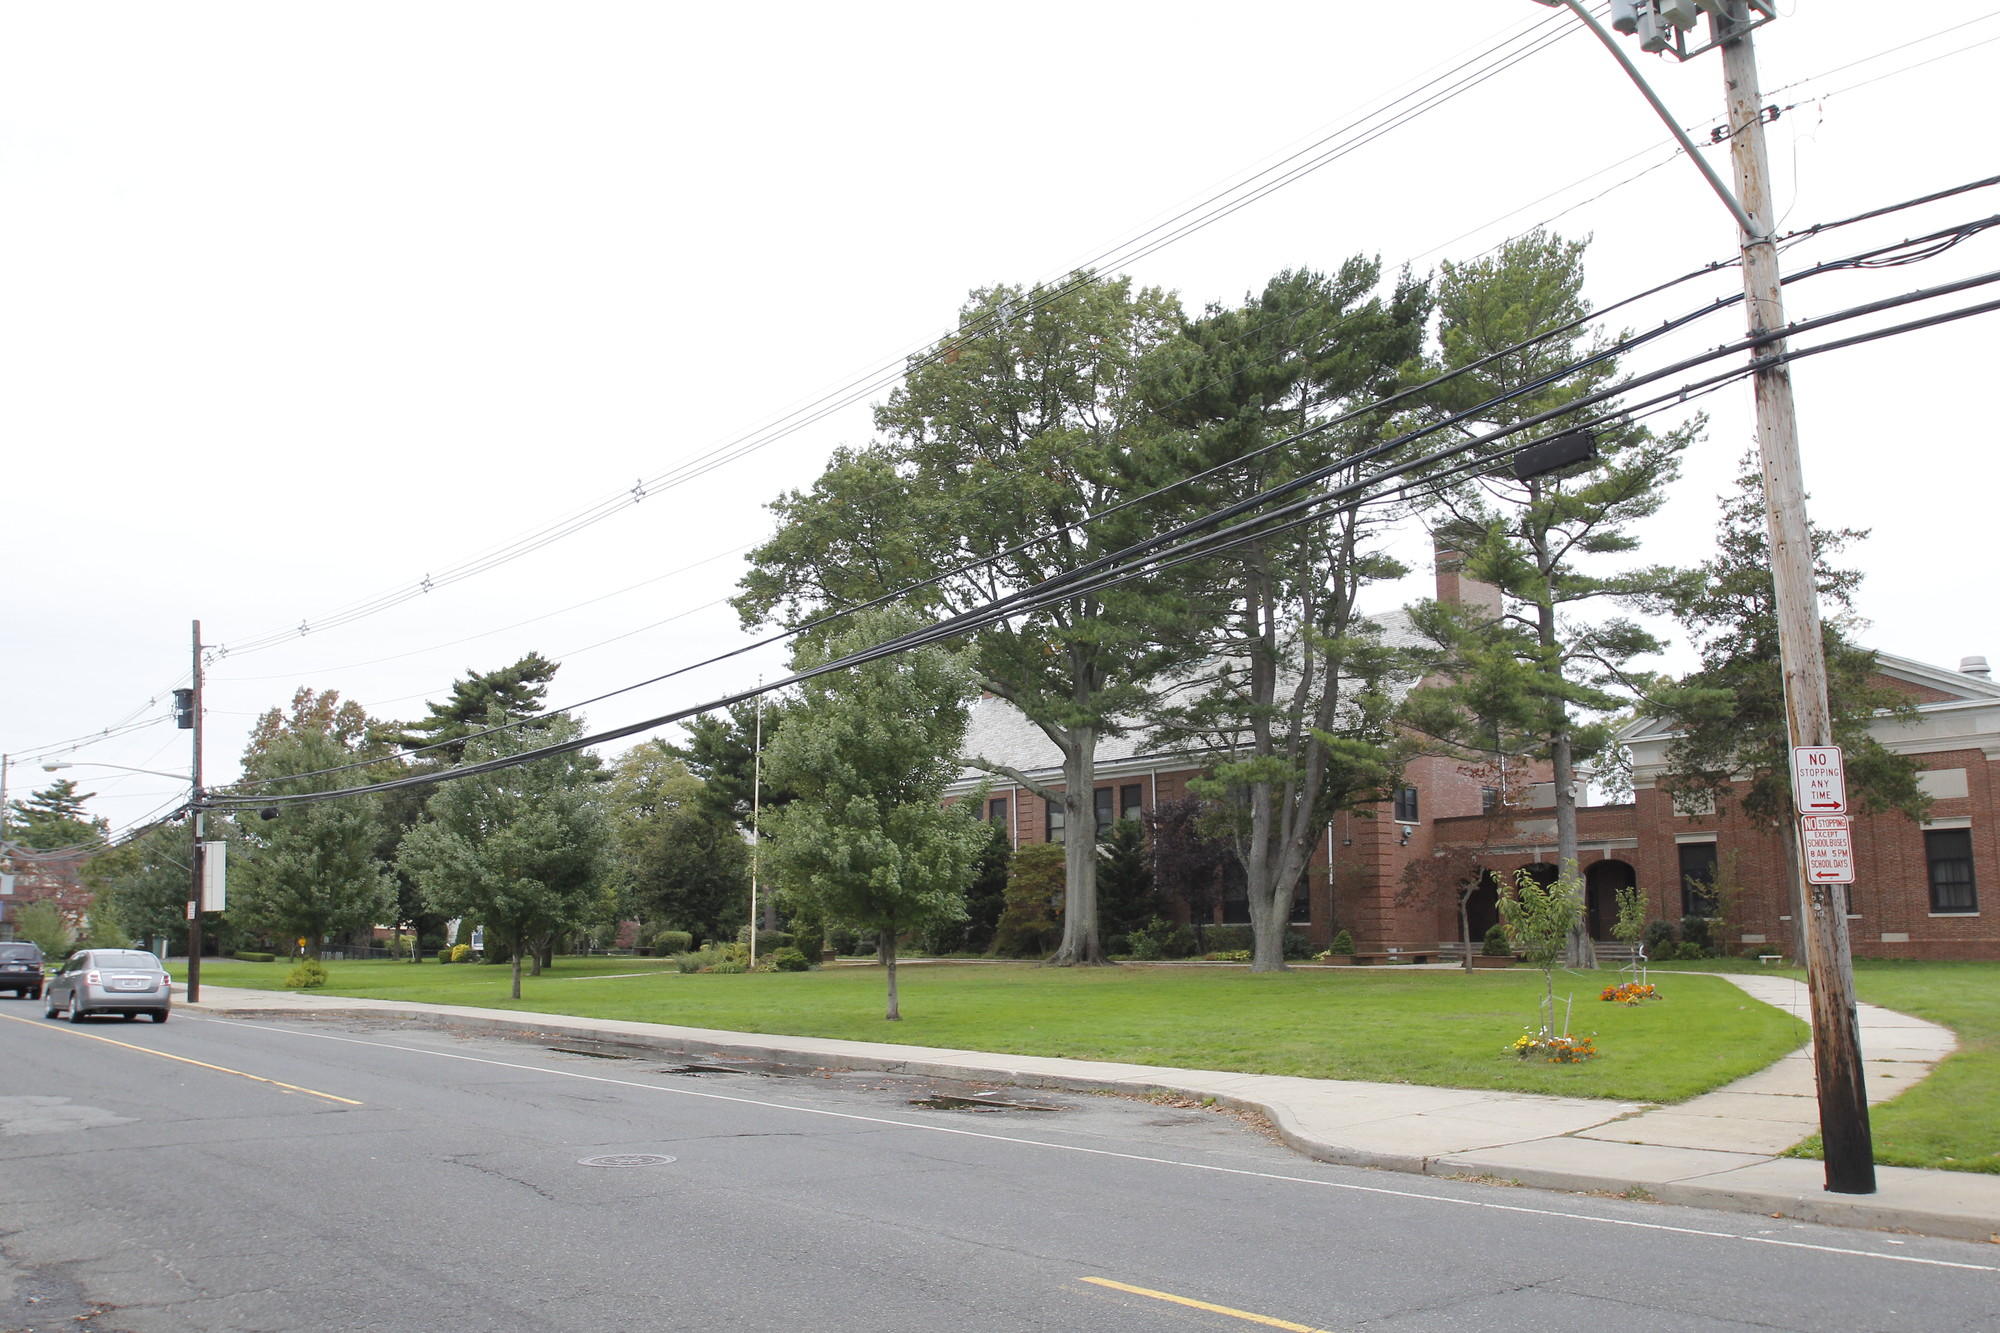 Traffic around the Hewitt School will soon be going slower, as Nassau County is set to install a speed camera on one of the streets in front of the building, though it won’t say when.